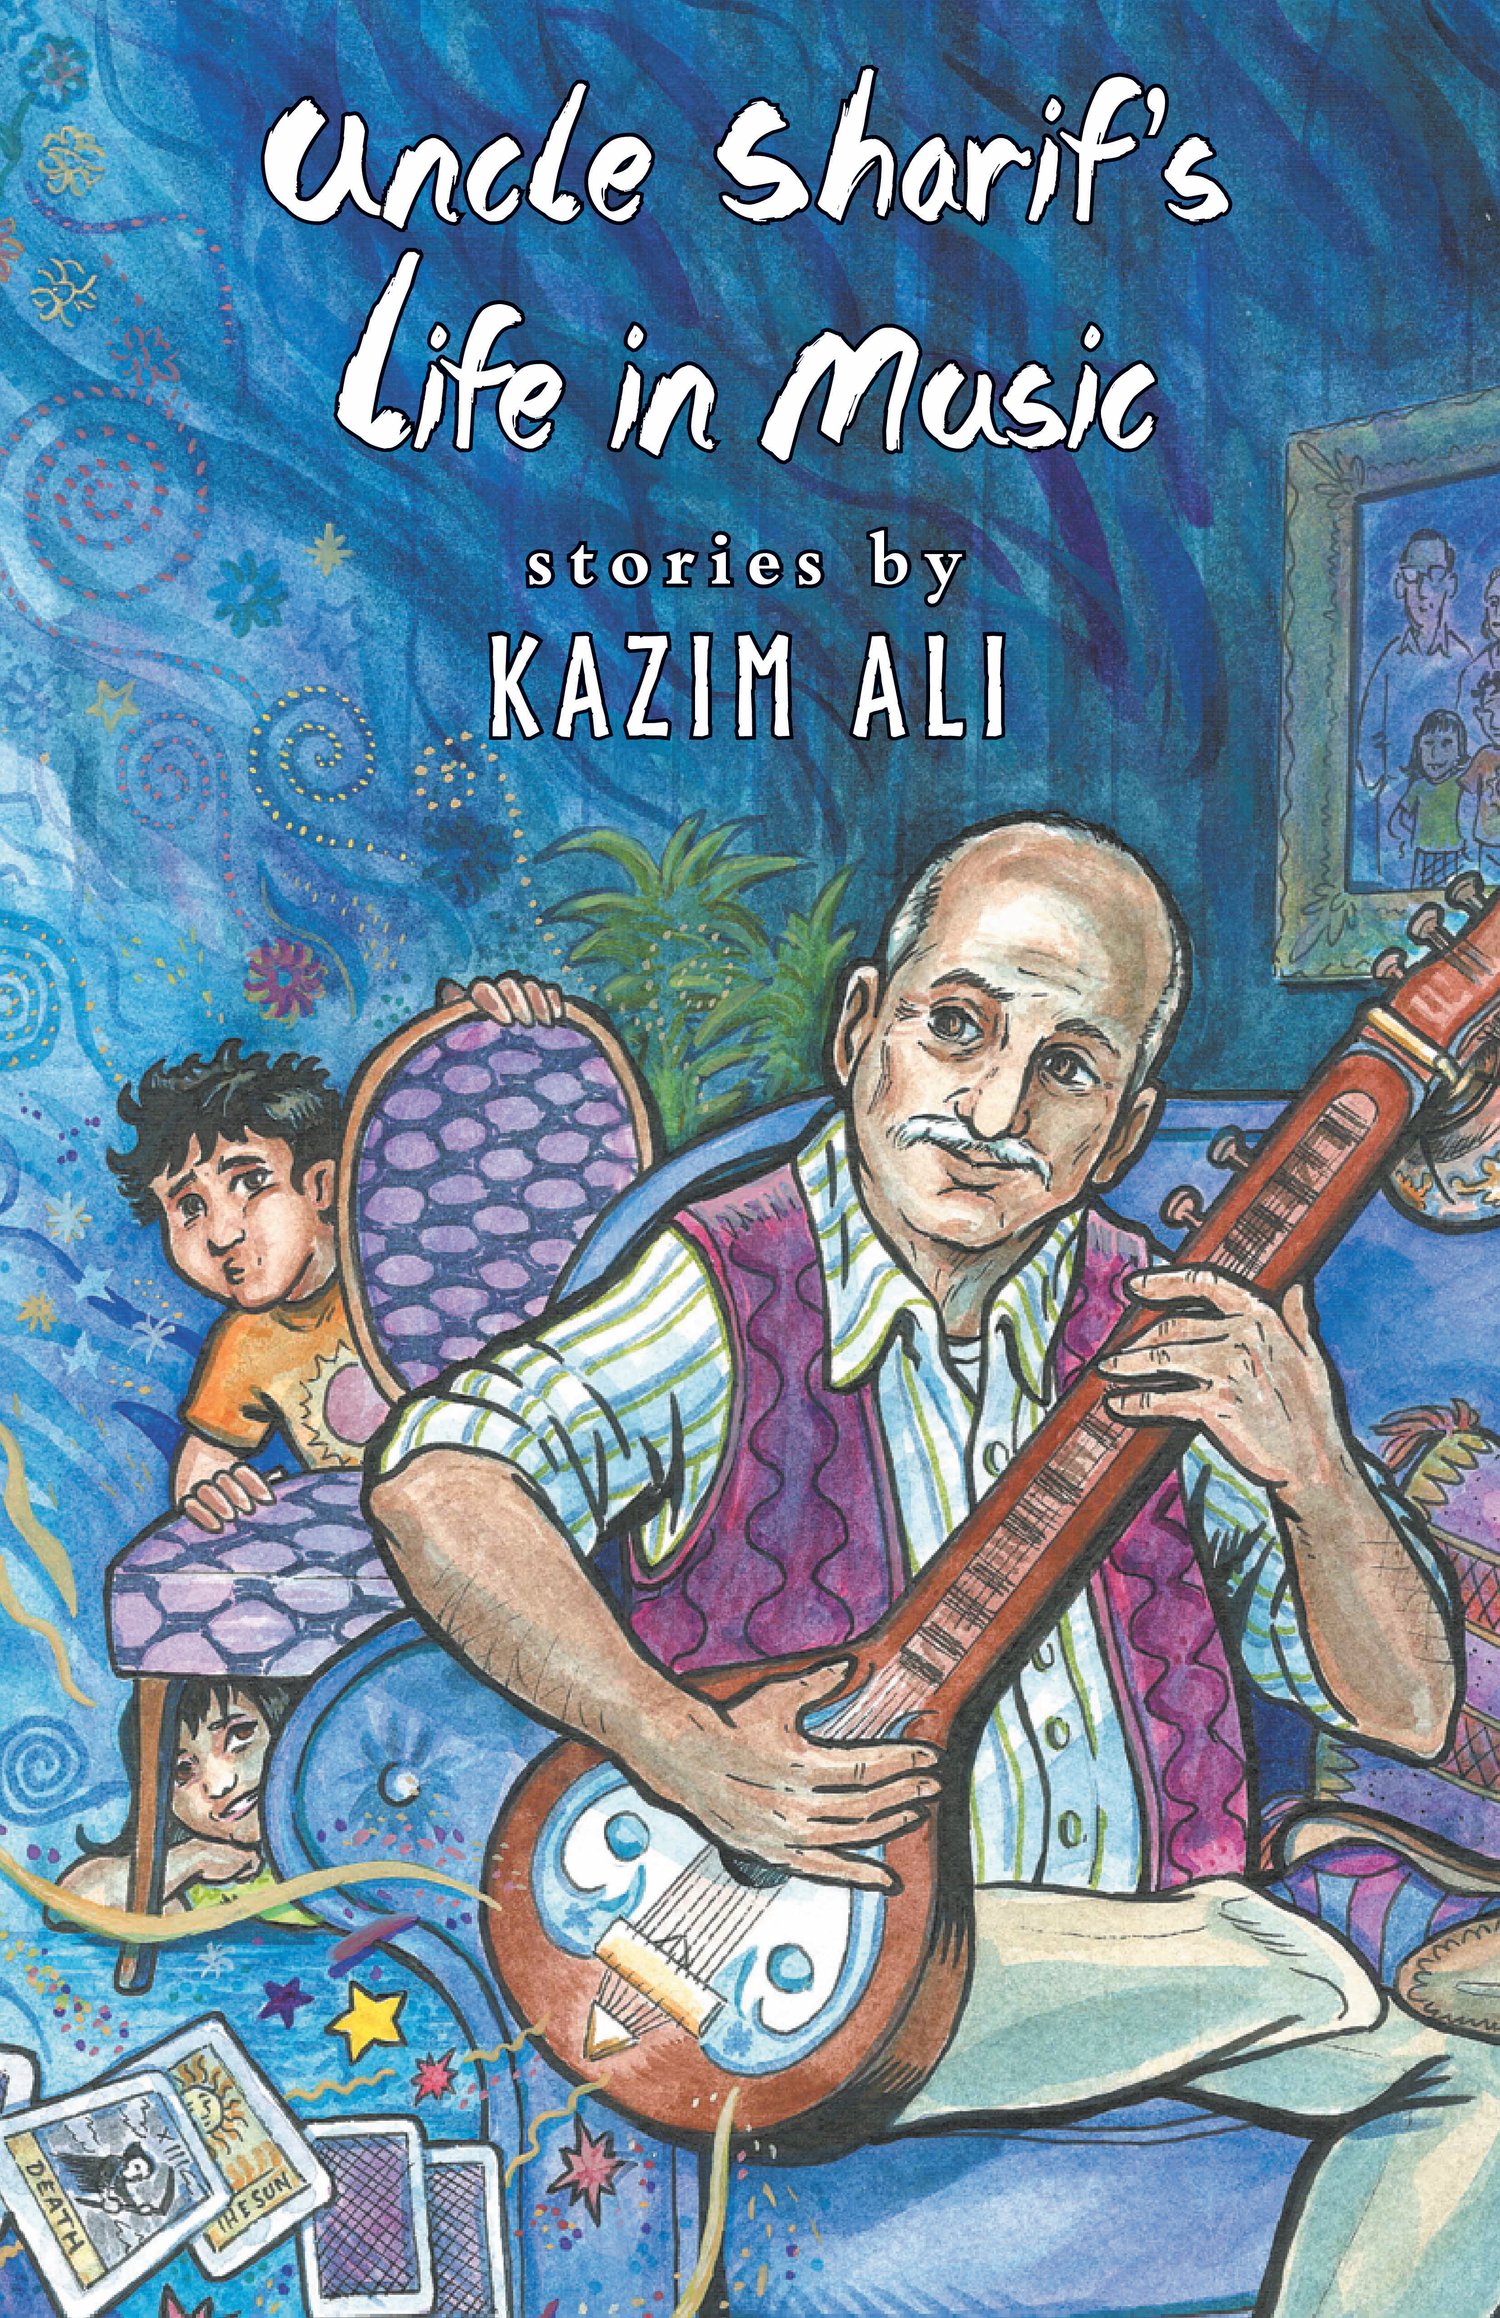 Image of Uncle Sharif's Life in Music by Kazim Ali